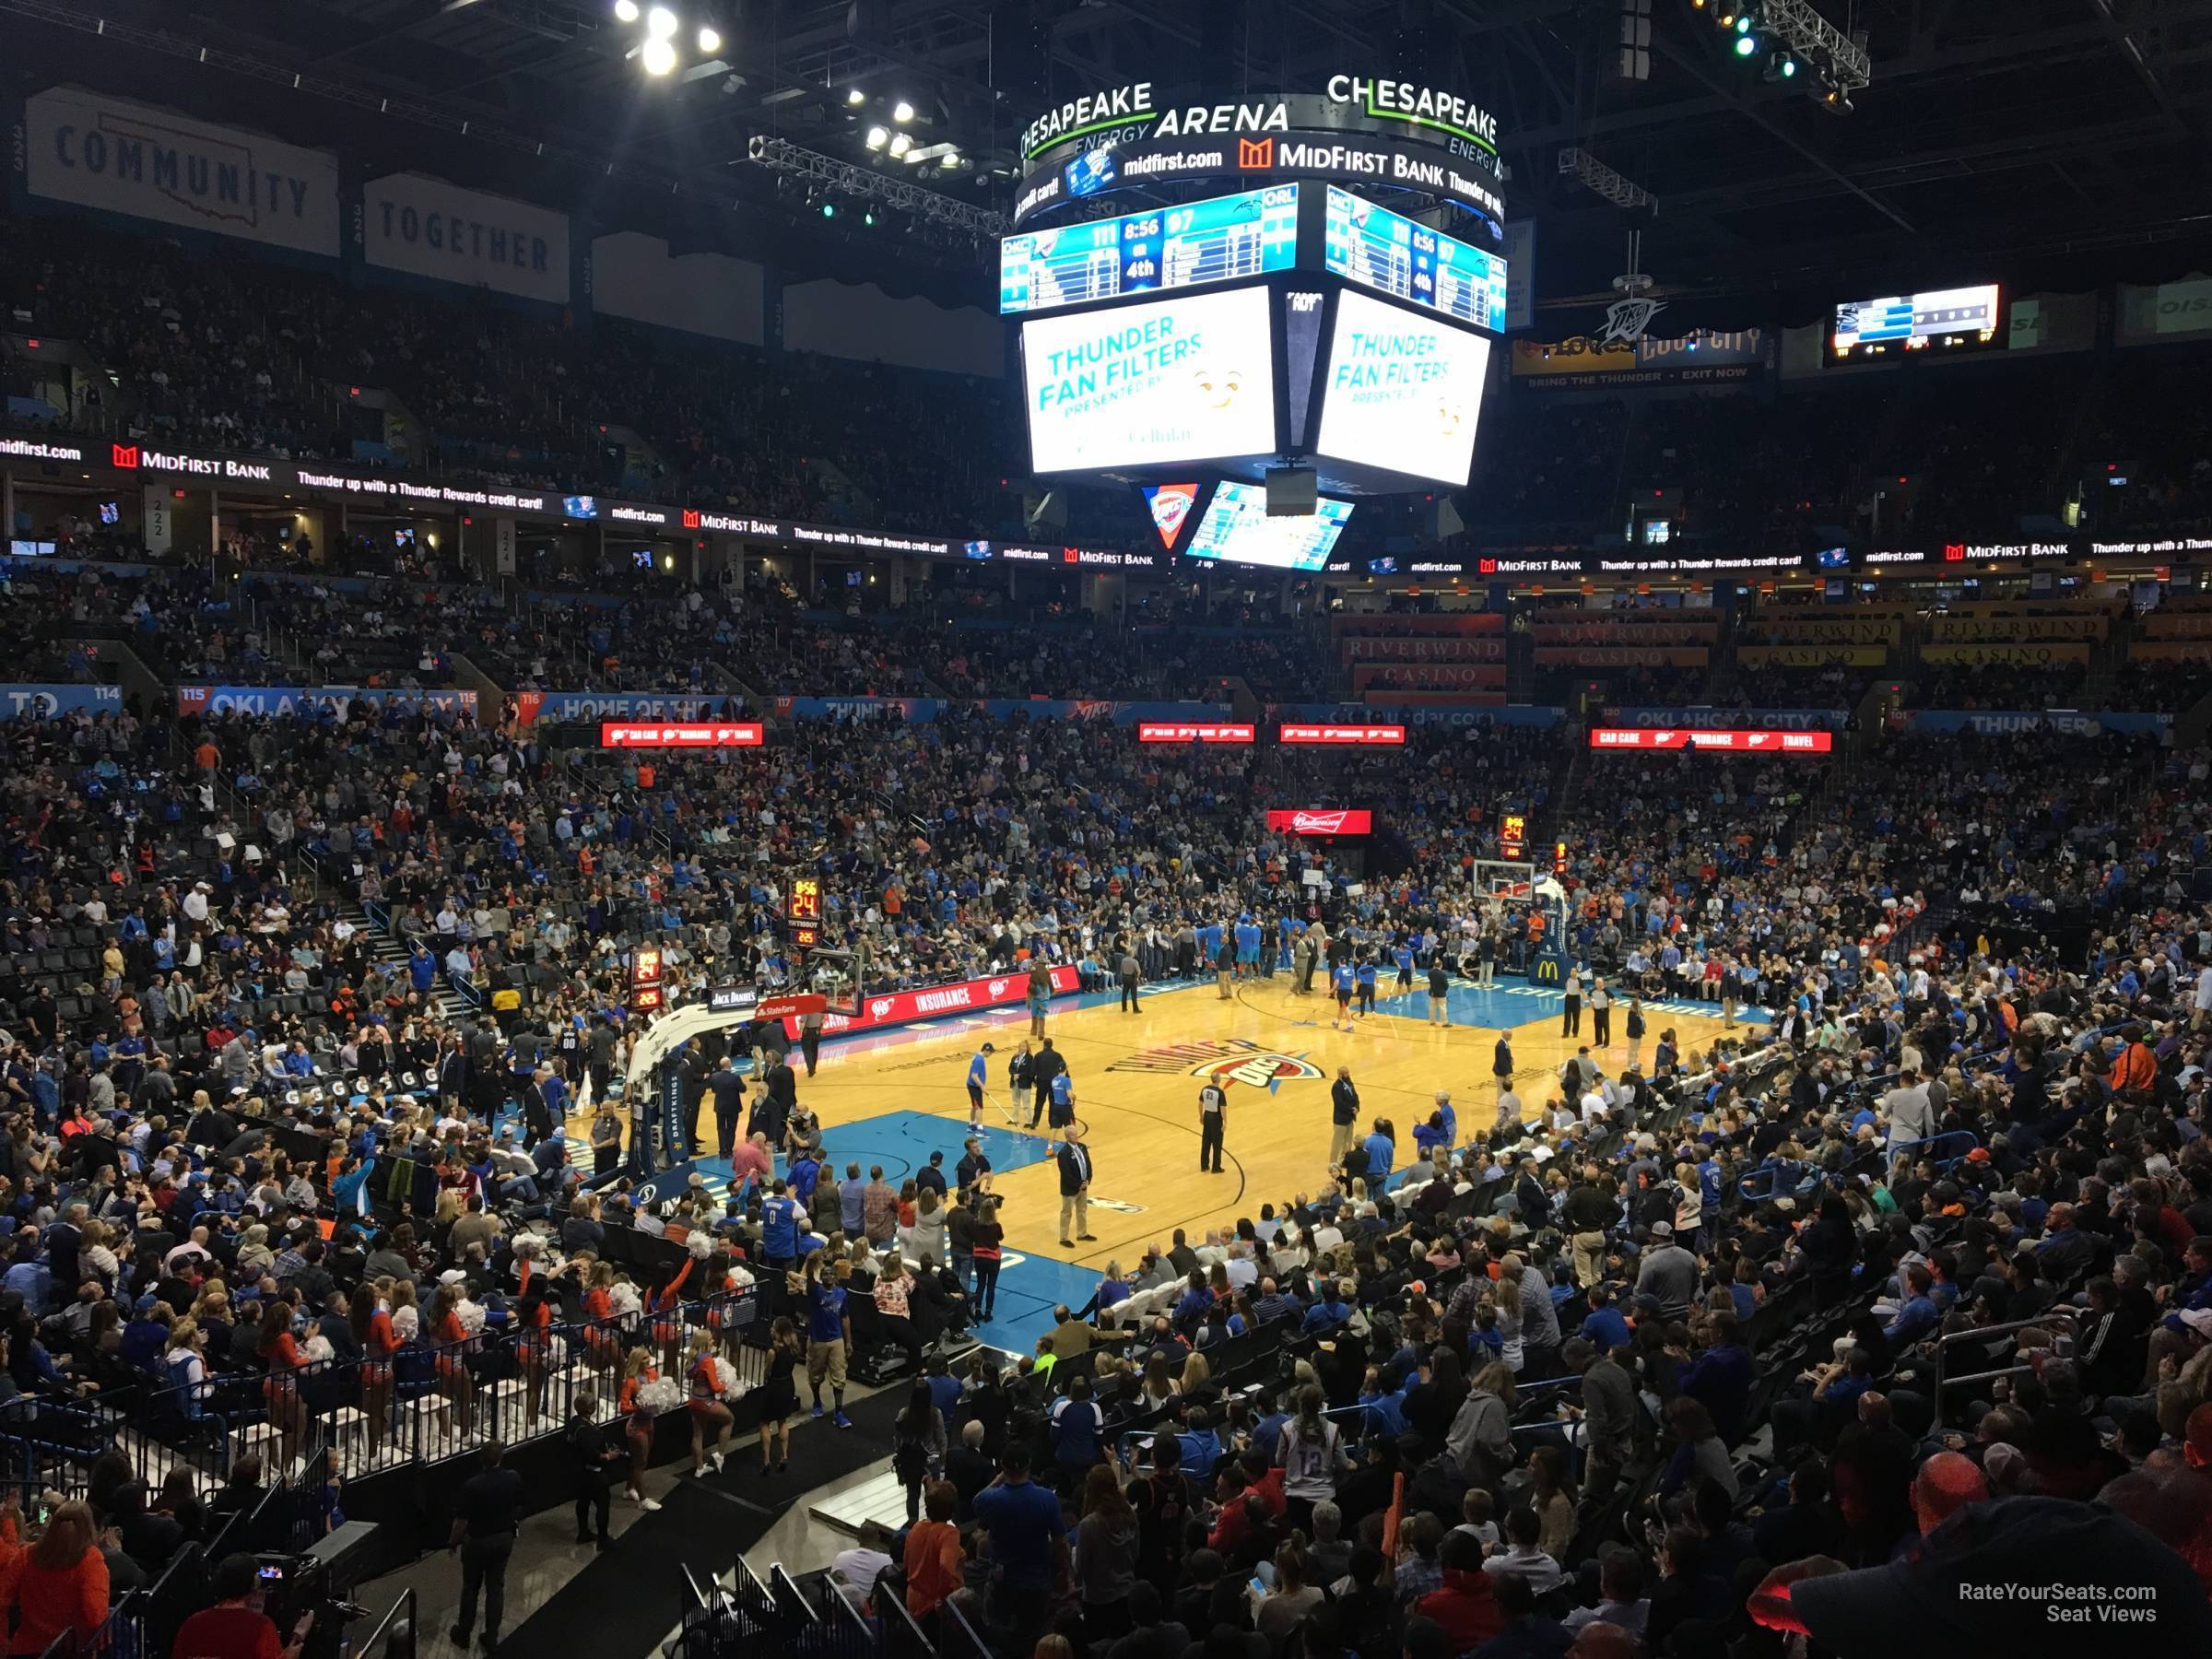 section 108, row u seat view  for basketball - paycom center